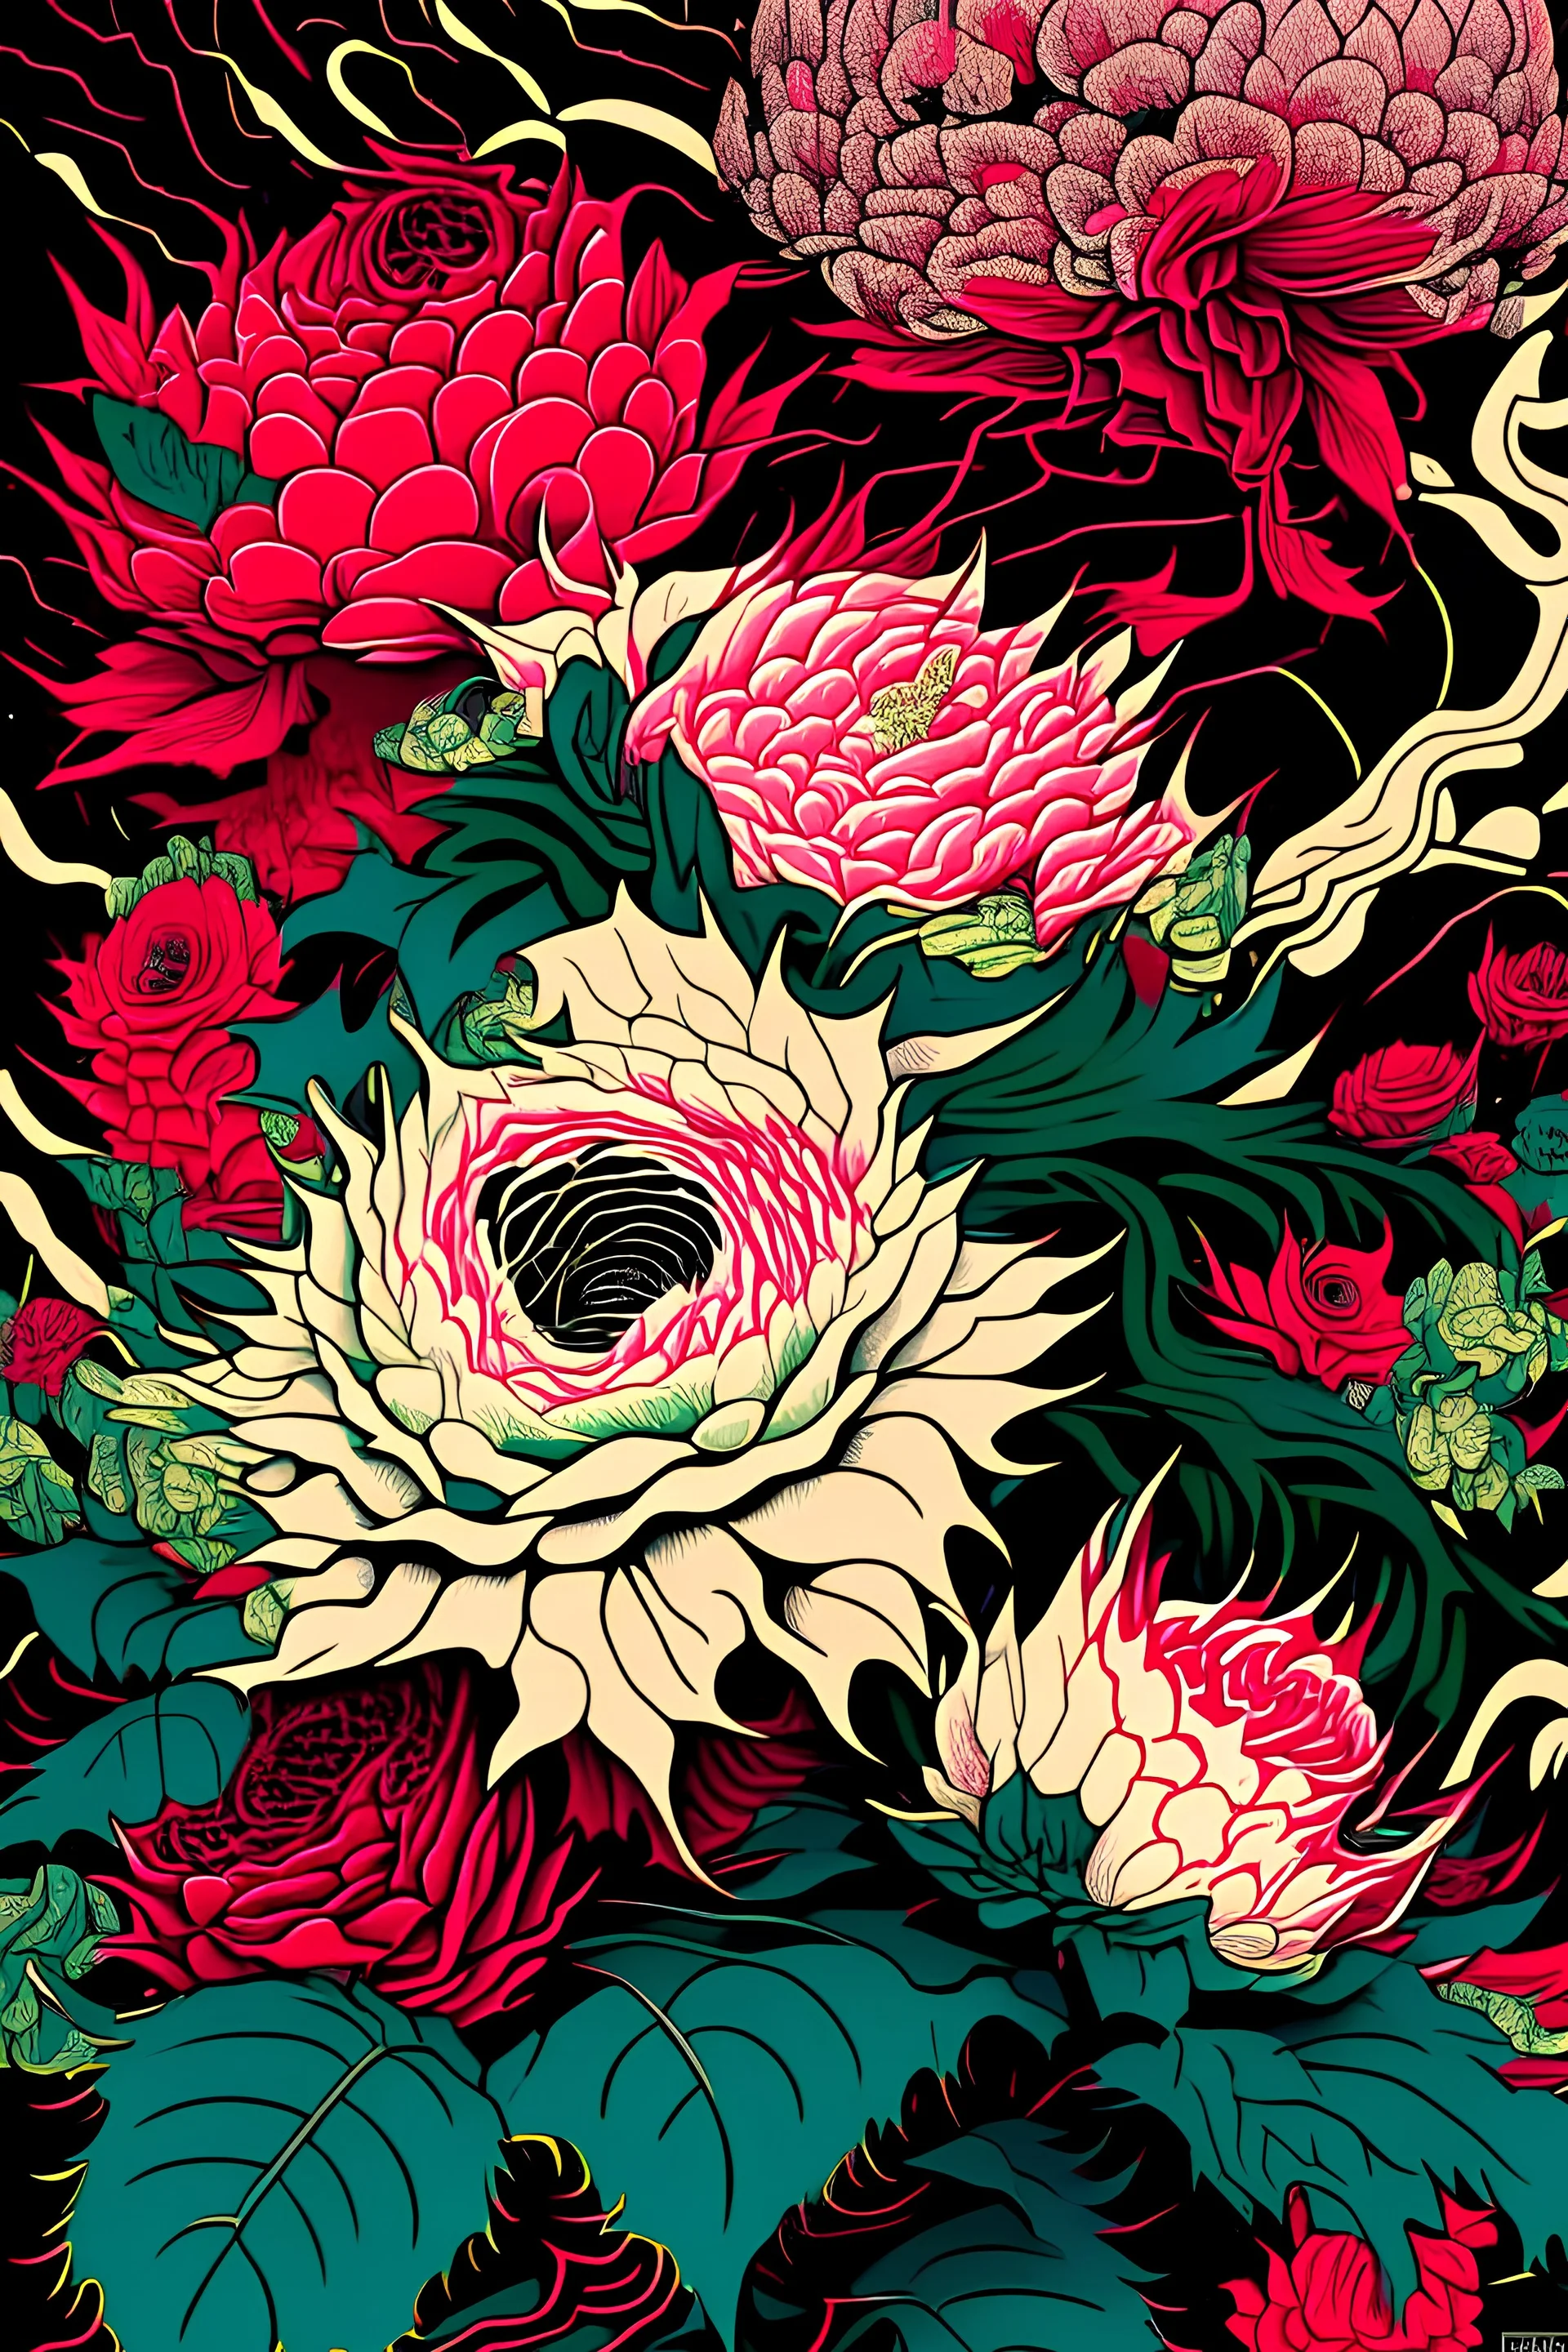 award-winning overdetailed Asian art of a spiky, flowy, red, fuchsia, black, lime green, teal and white Roses and Hibiscus, by Yuko Shimizu and Hokusai collab